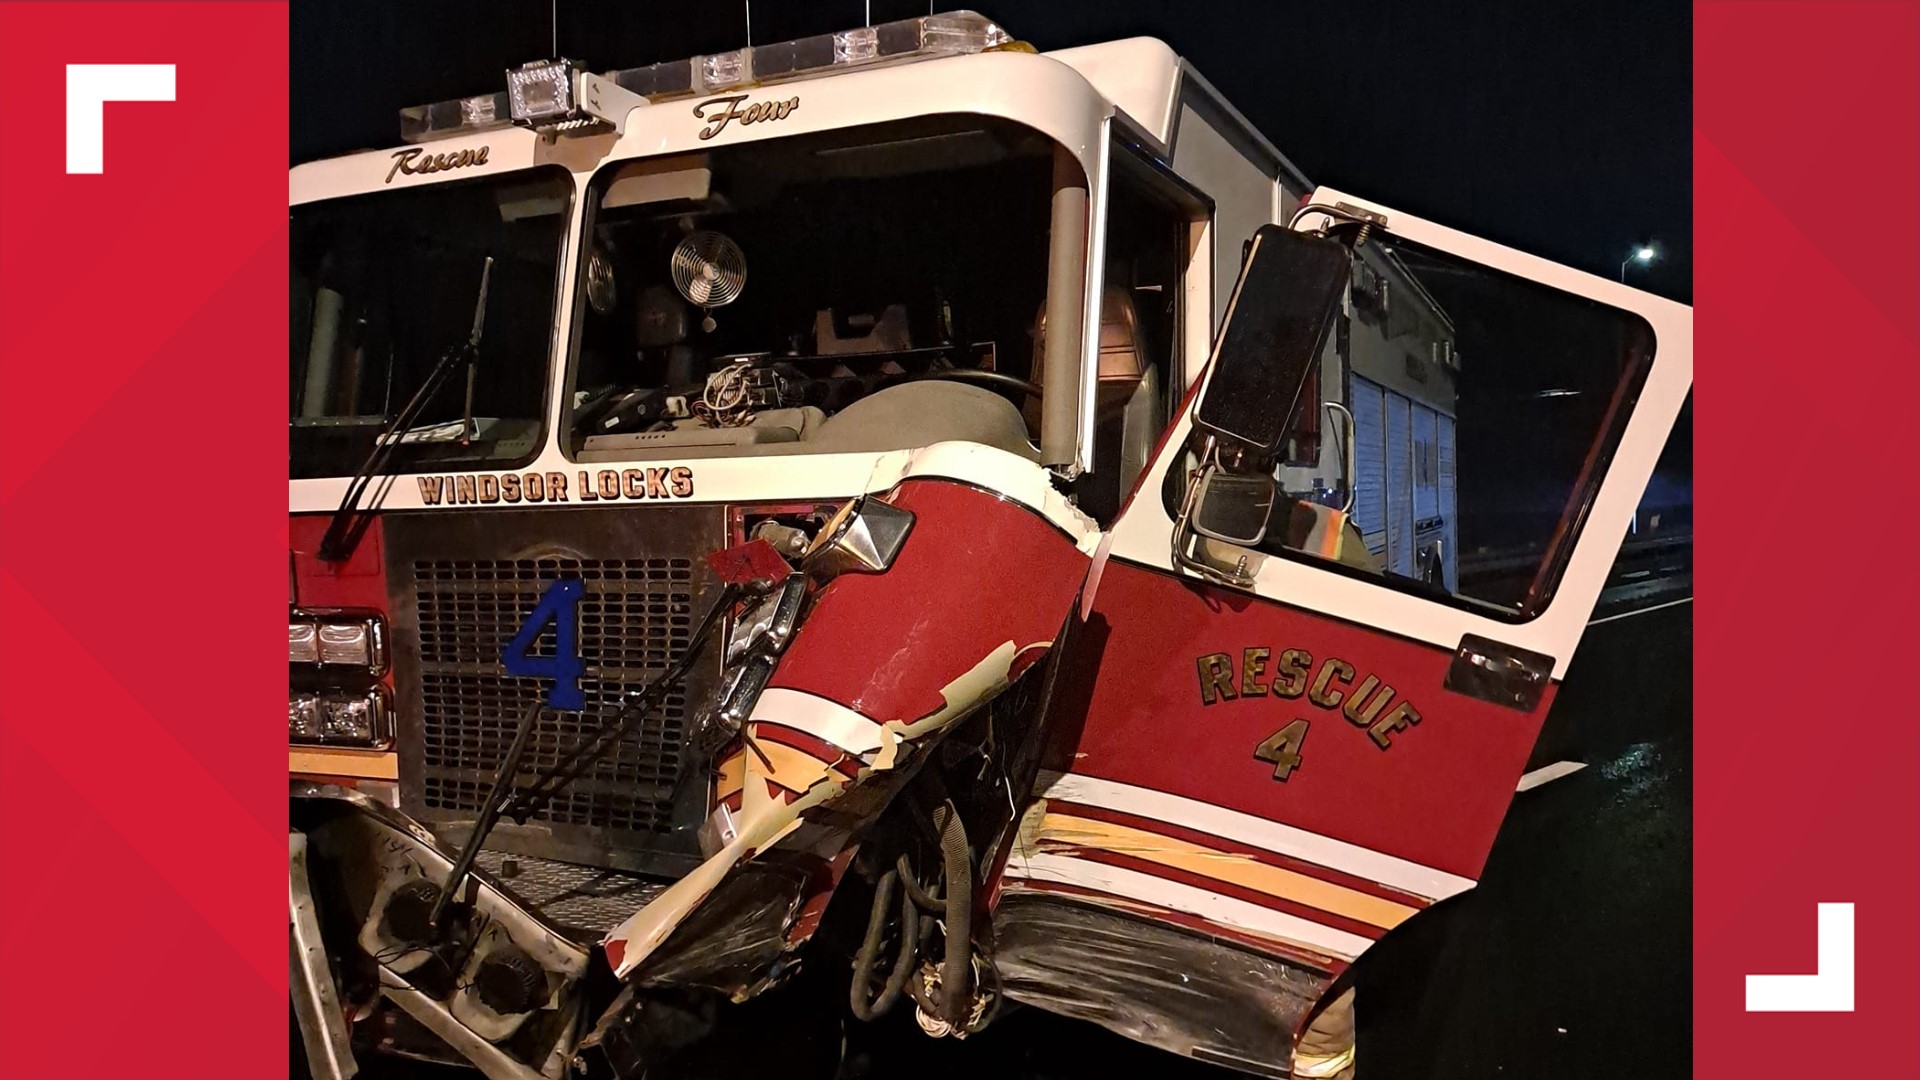 A Windsor Locks Fire Department fire truck is out of commission after it was struck by a vehicle last Wednesday, officials said.